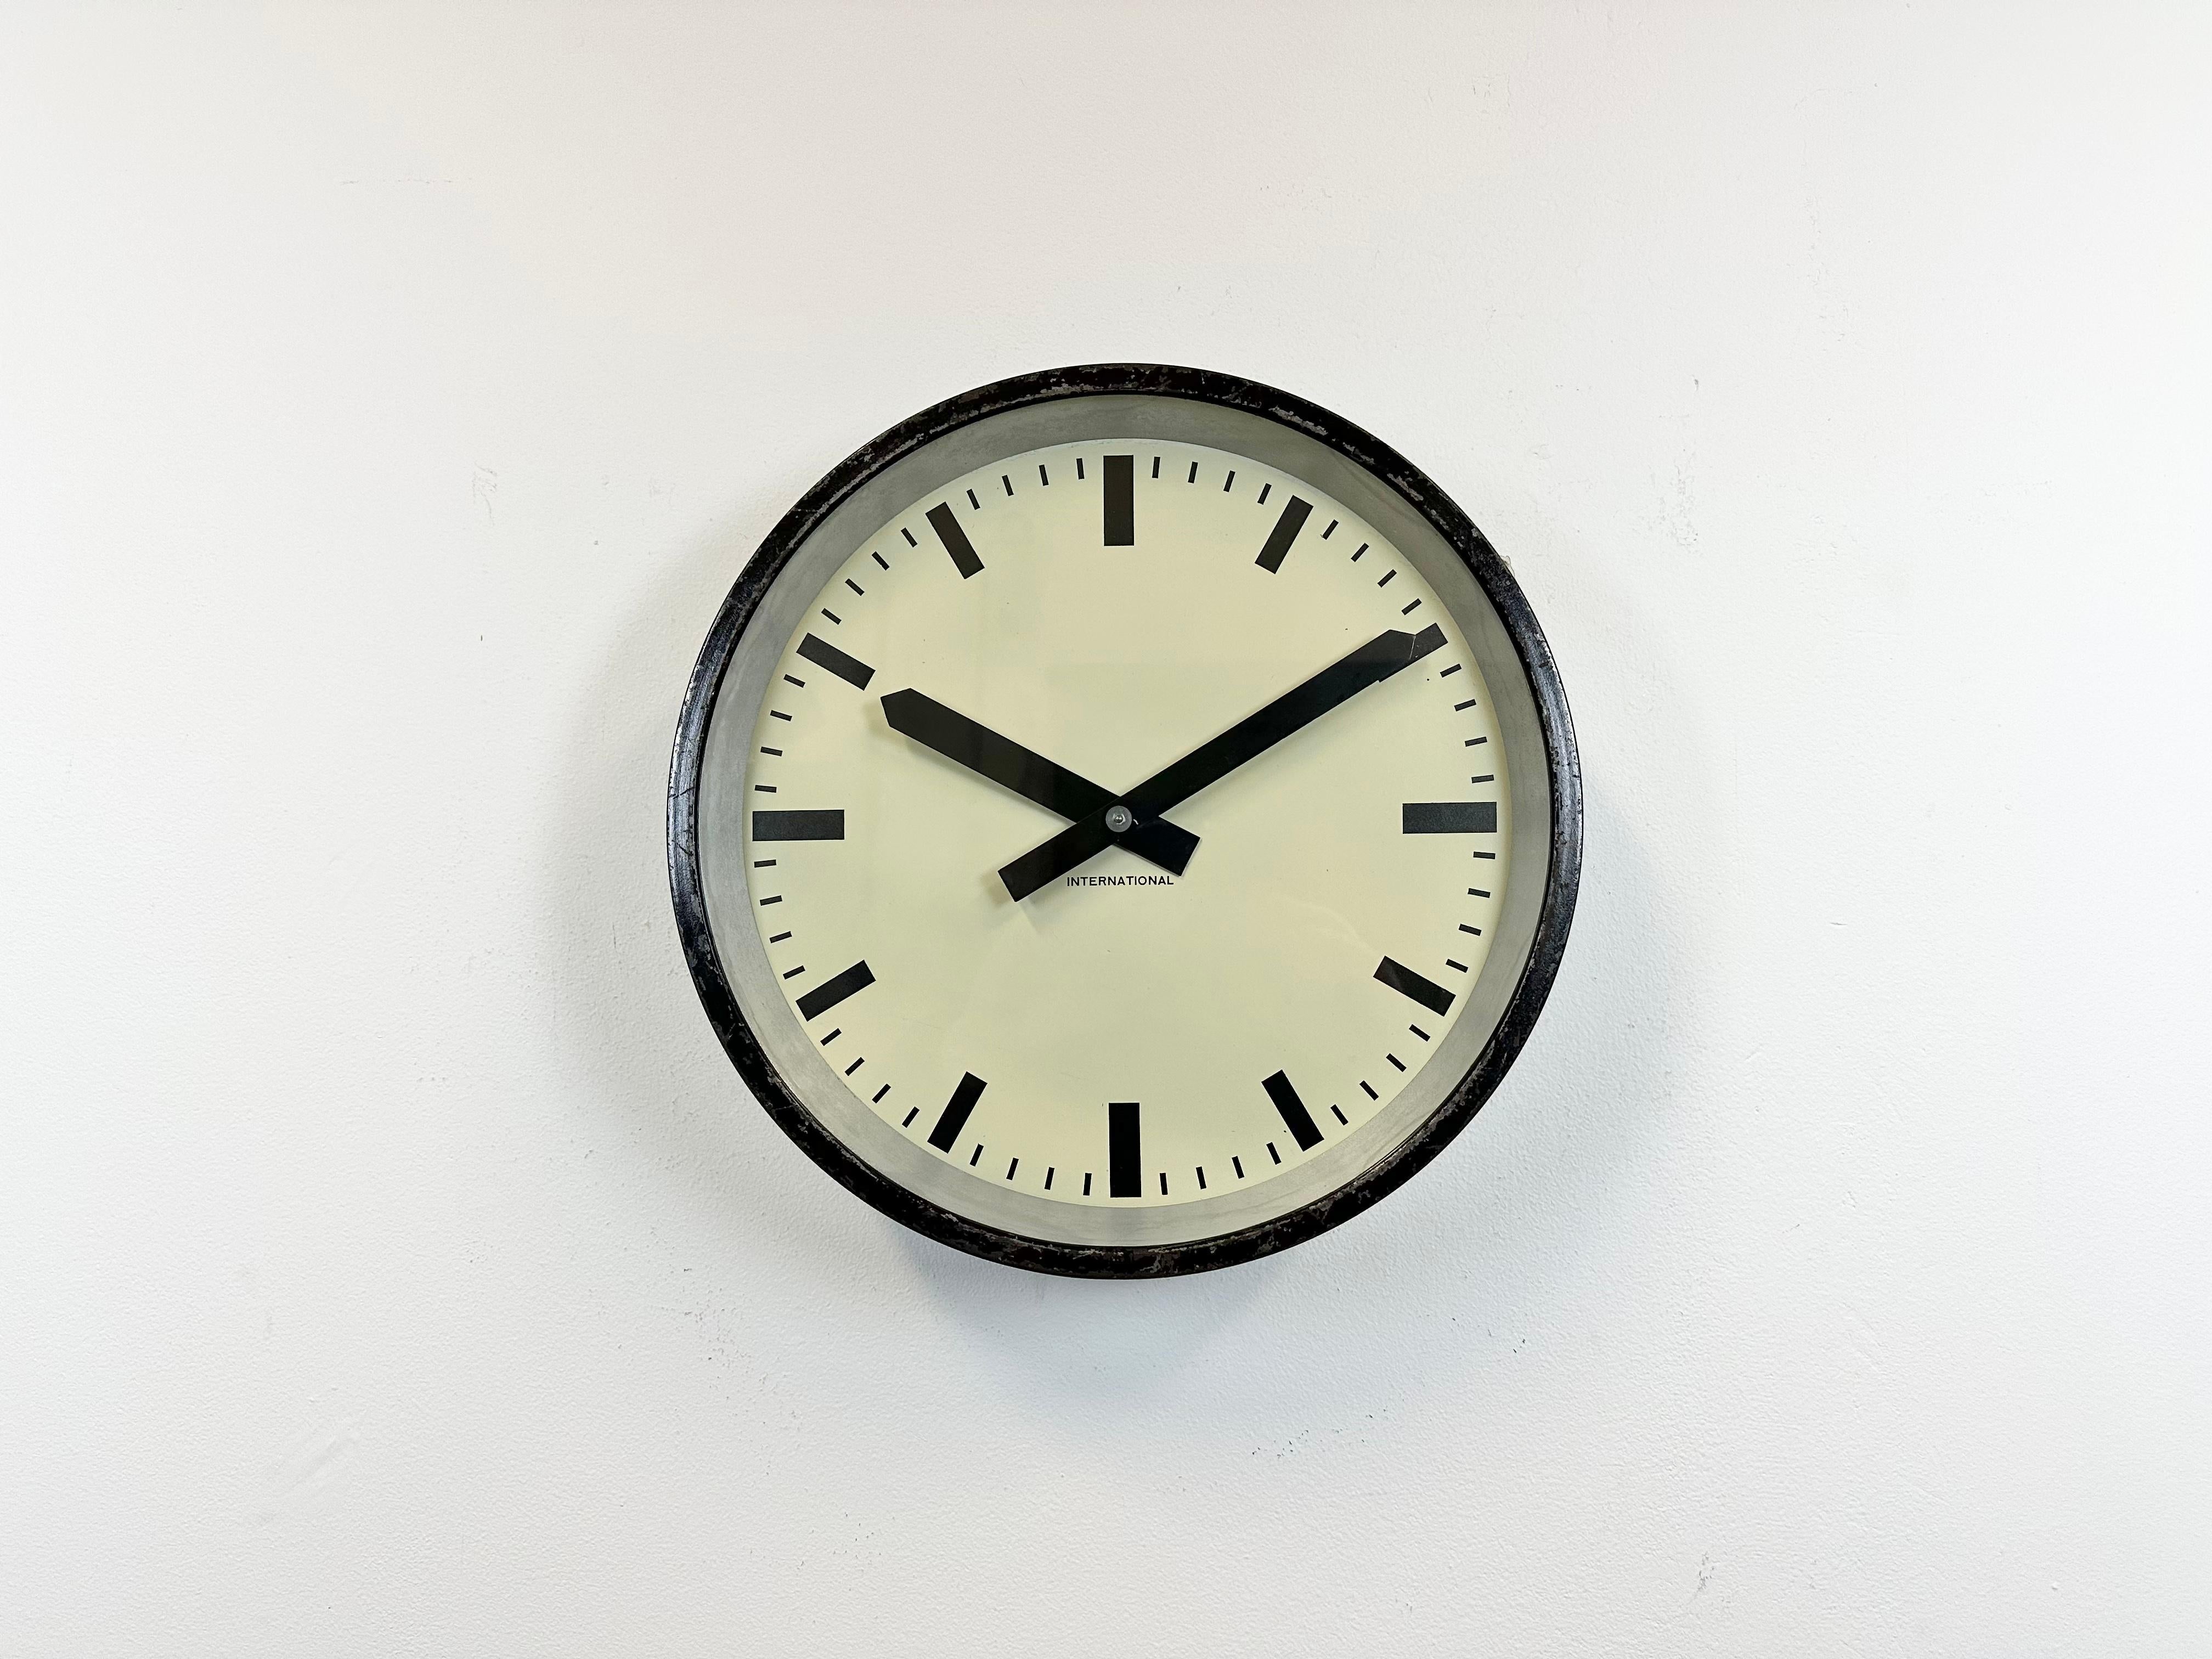 This wall clock was produced by International in Germany during the 1950s. It features a black metal frame, iron dial, aluminium hands and a clear glass cover. The piece has been converted into a battery-powered clockwork and requires only one